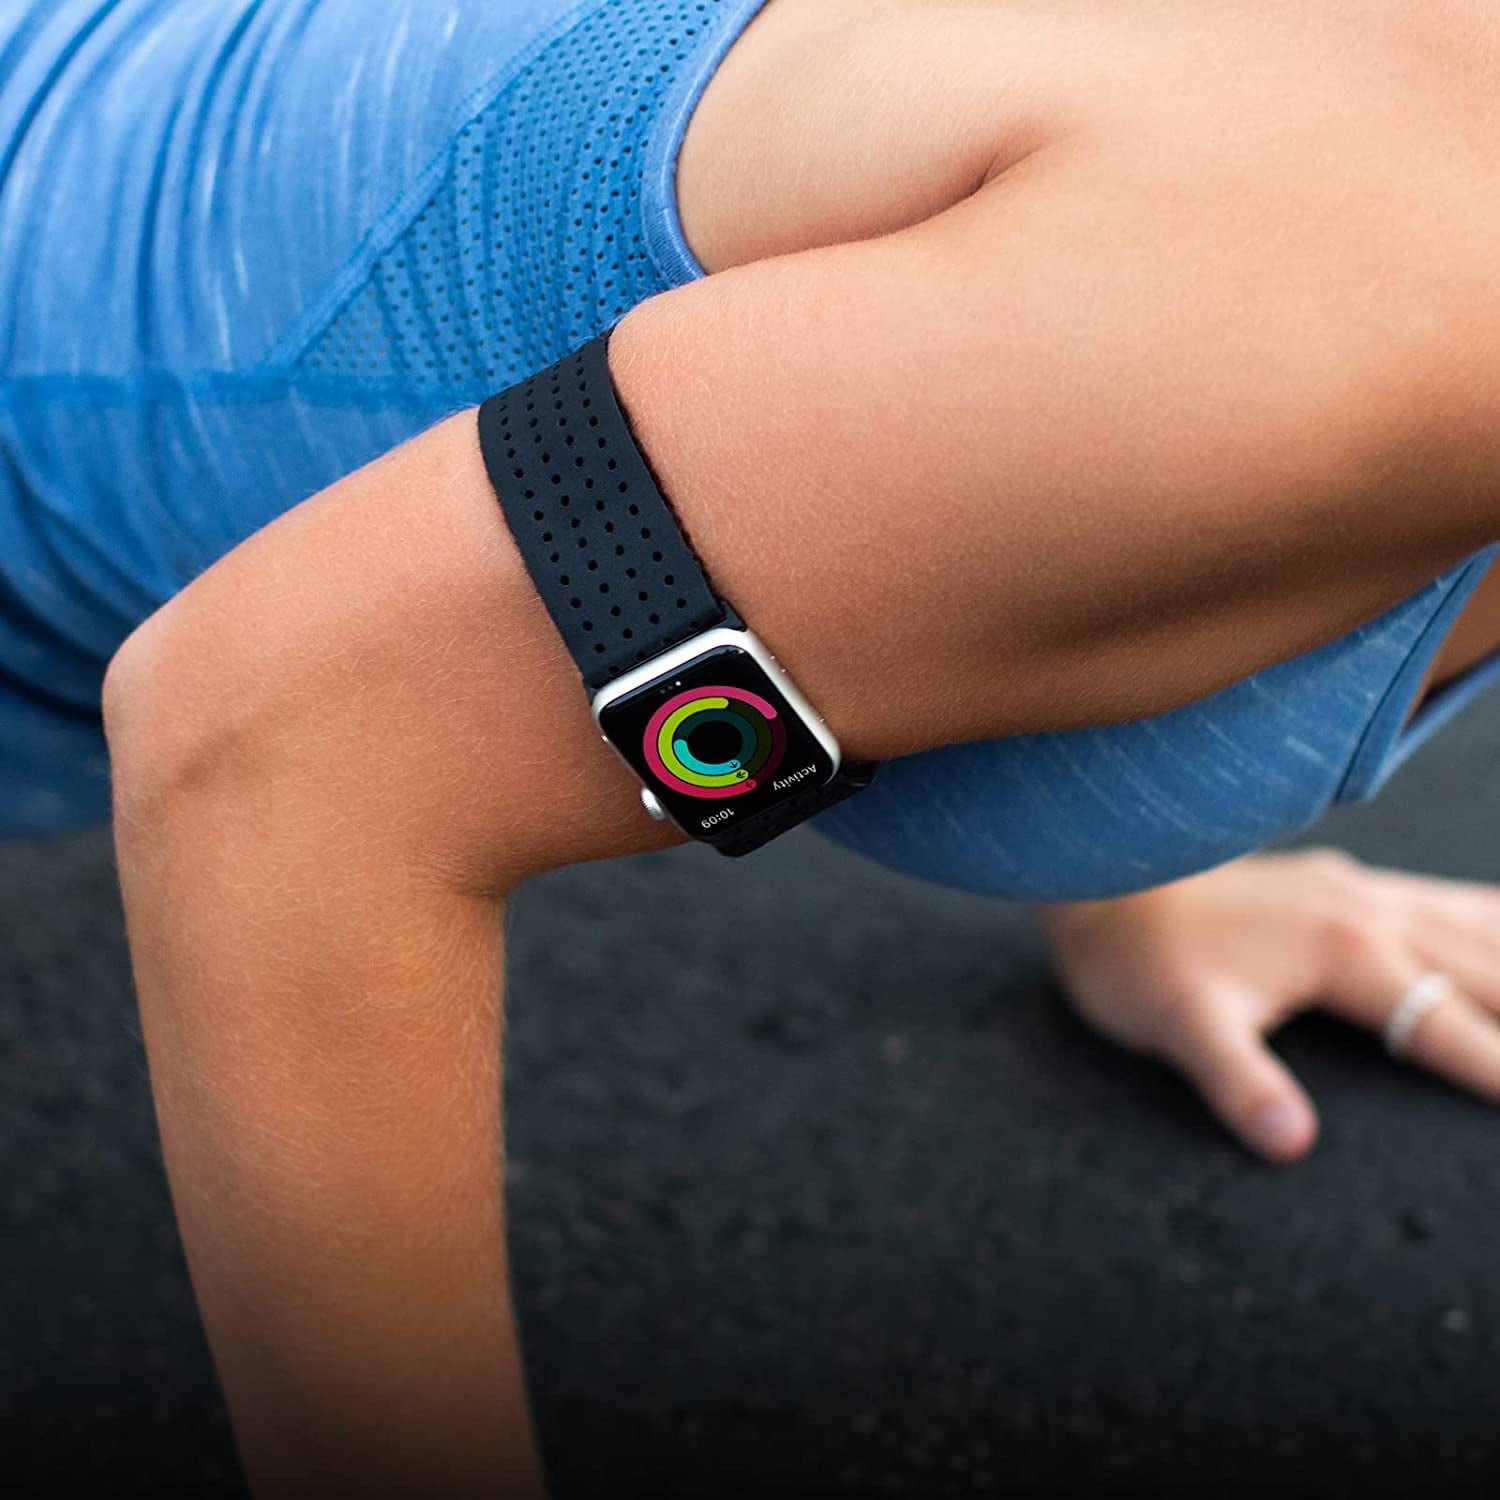 Breathable Sports Apple Watch Bands